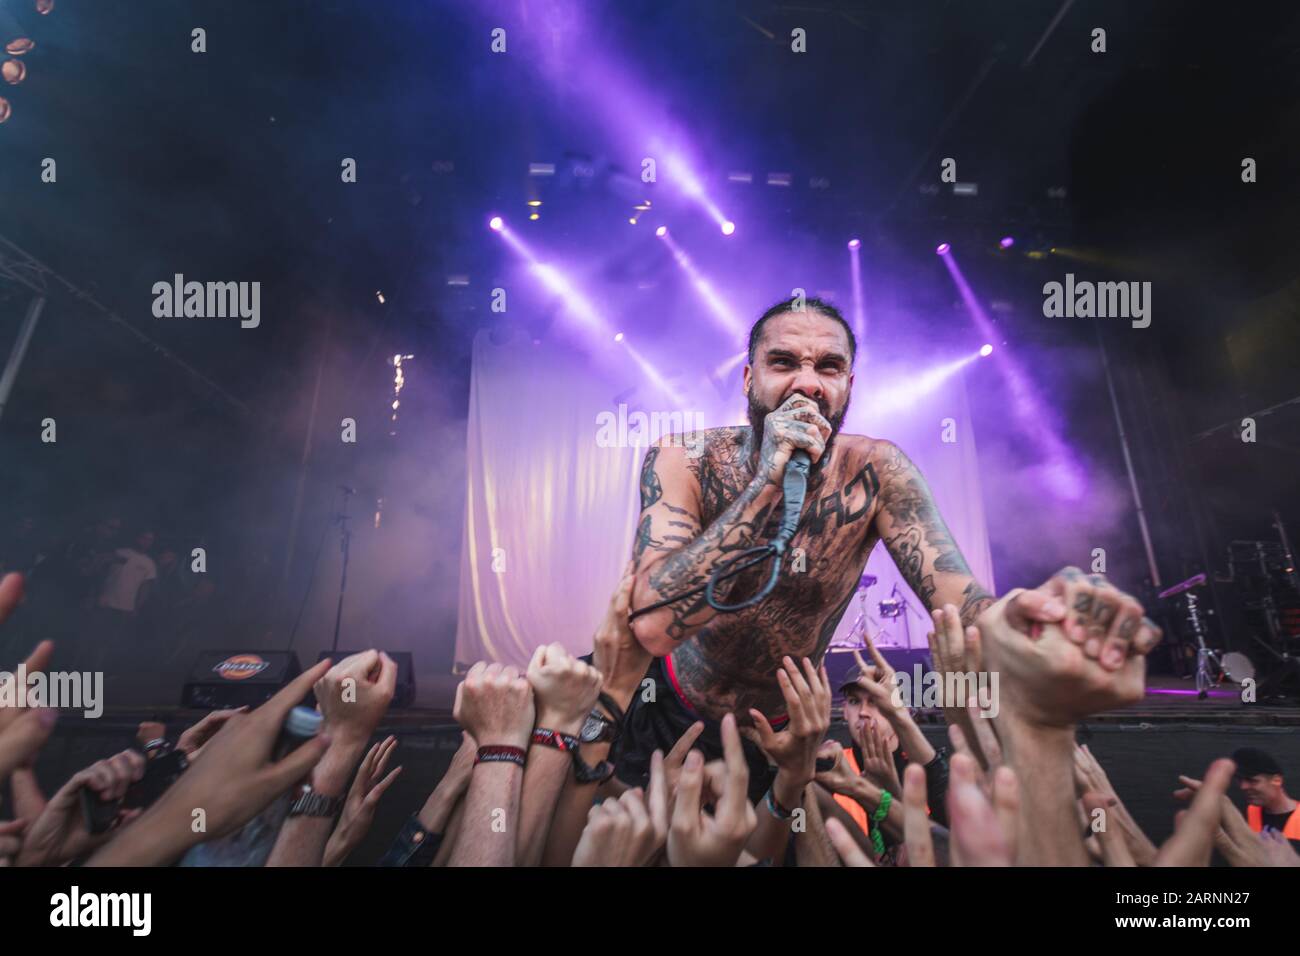 Copenhagen, Denmark. 20th, June 2019. The American rock metal group Fever 333 performs a live concert during the Danish heavy metal festival Copenhell 2019 in Copenhagen. Here vocalist Jason Aalon Butler is seen with the crowds. (Photo credit: Gonzales Photo - Christian Larsen). Stock Photo